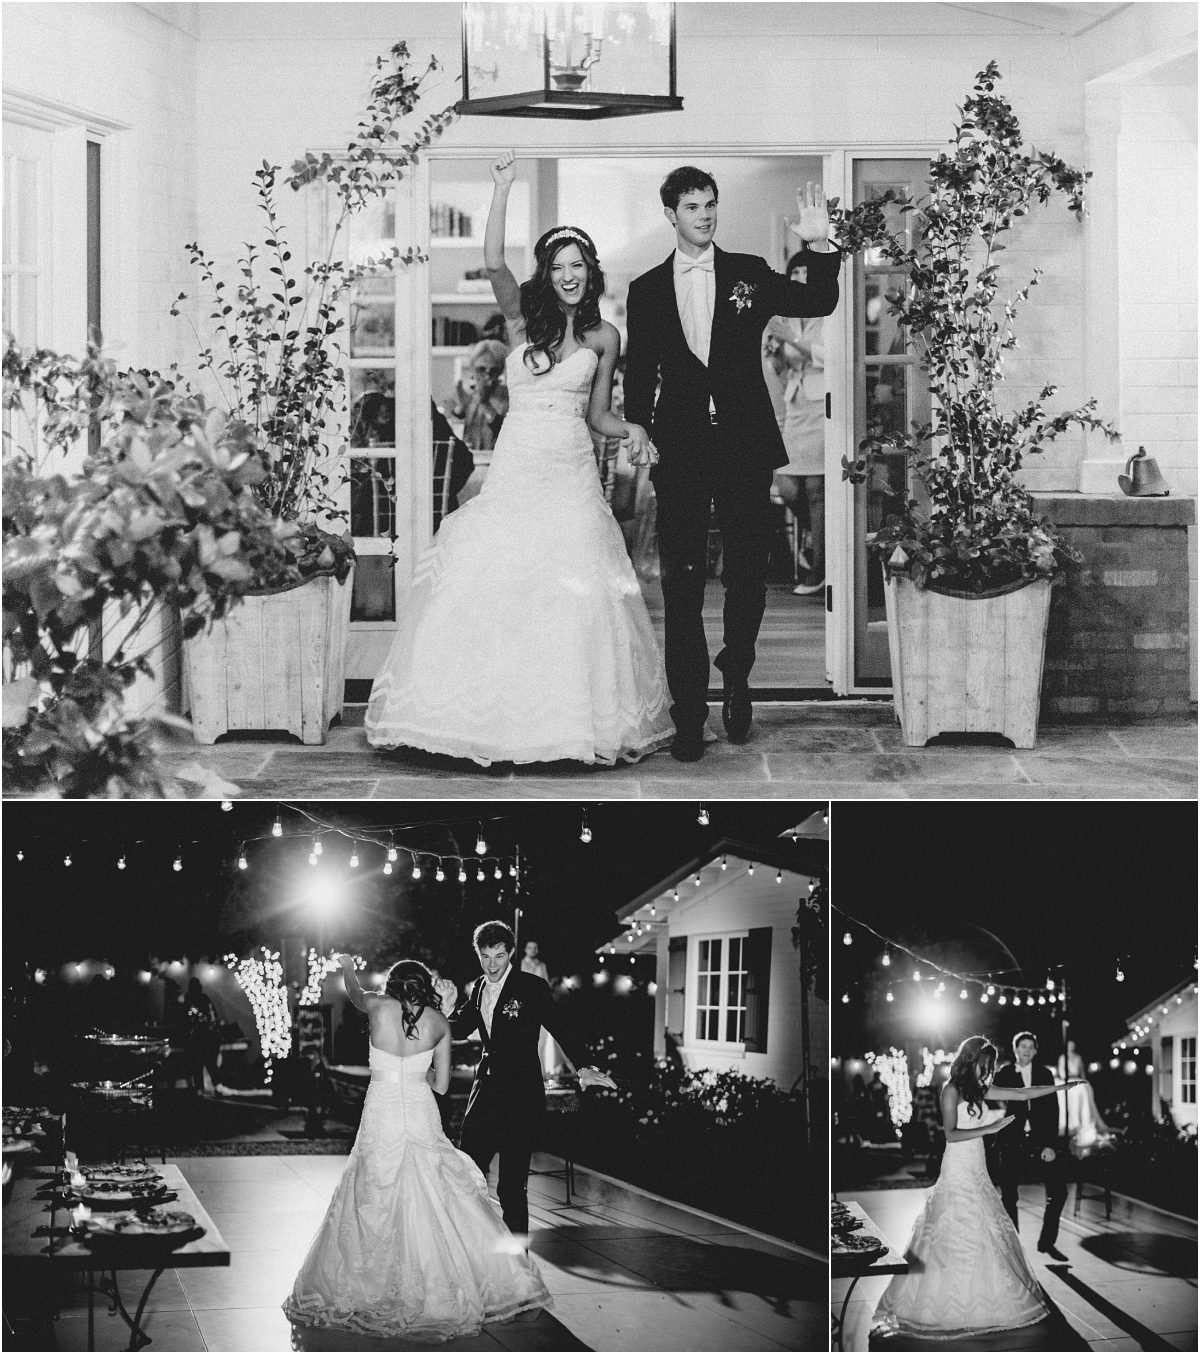 outdoor reception, scottsdale wedding planner, arizona weddings, black and white image, grand entrance, bride and groom, first dance, outdoor dance floor